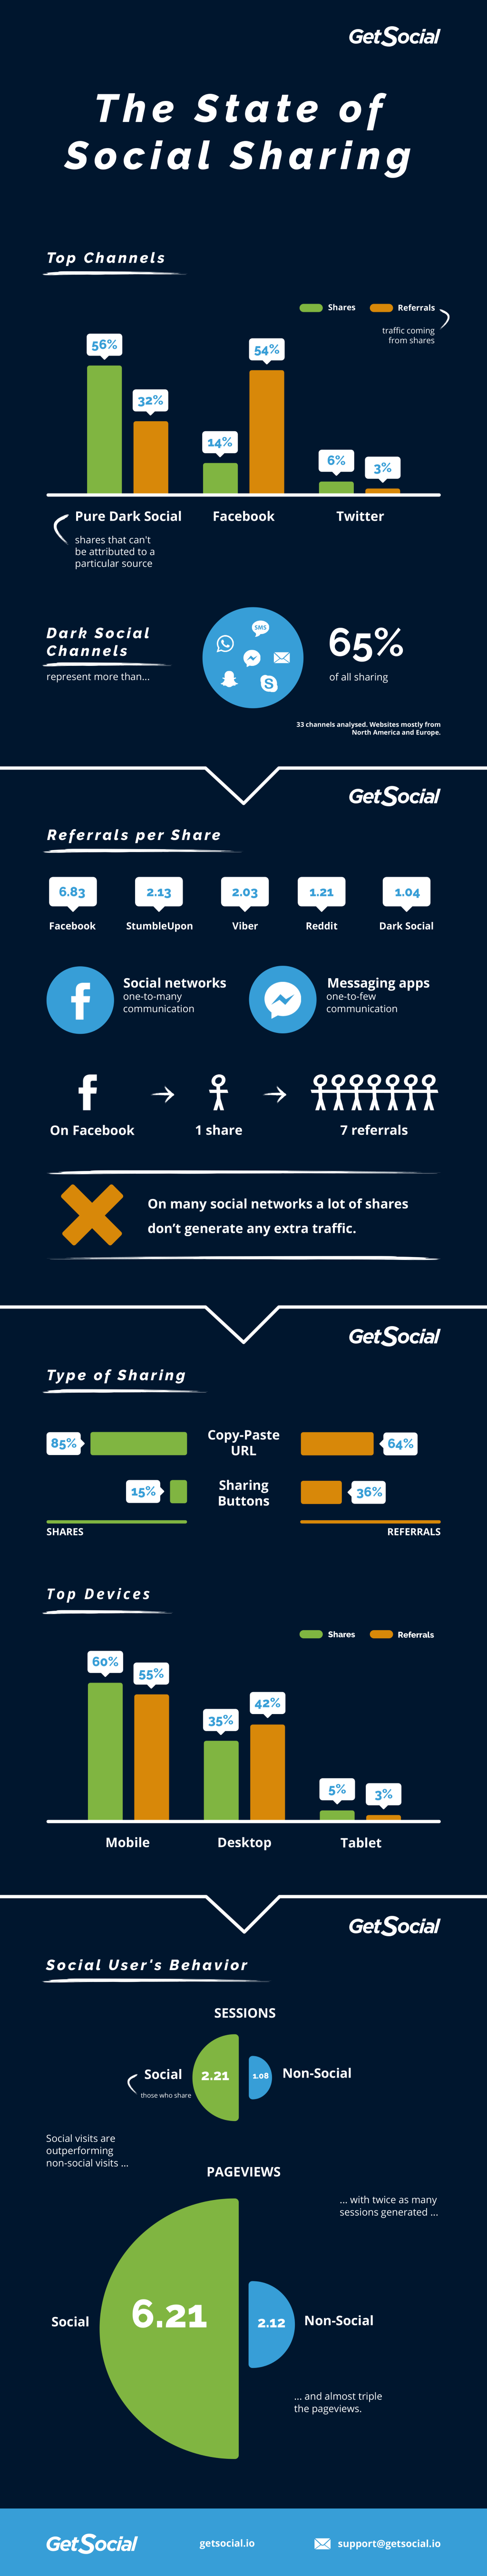 The State of Social Sharing 2017 [Infographic]